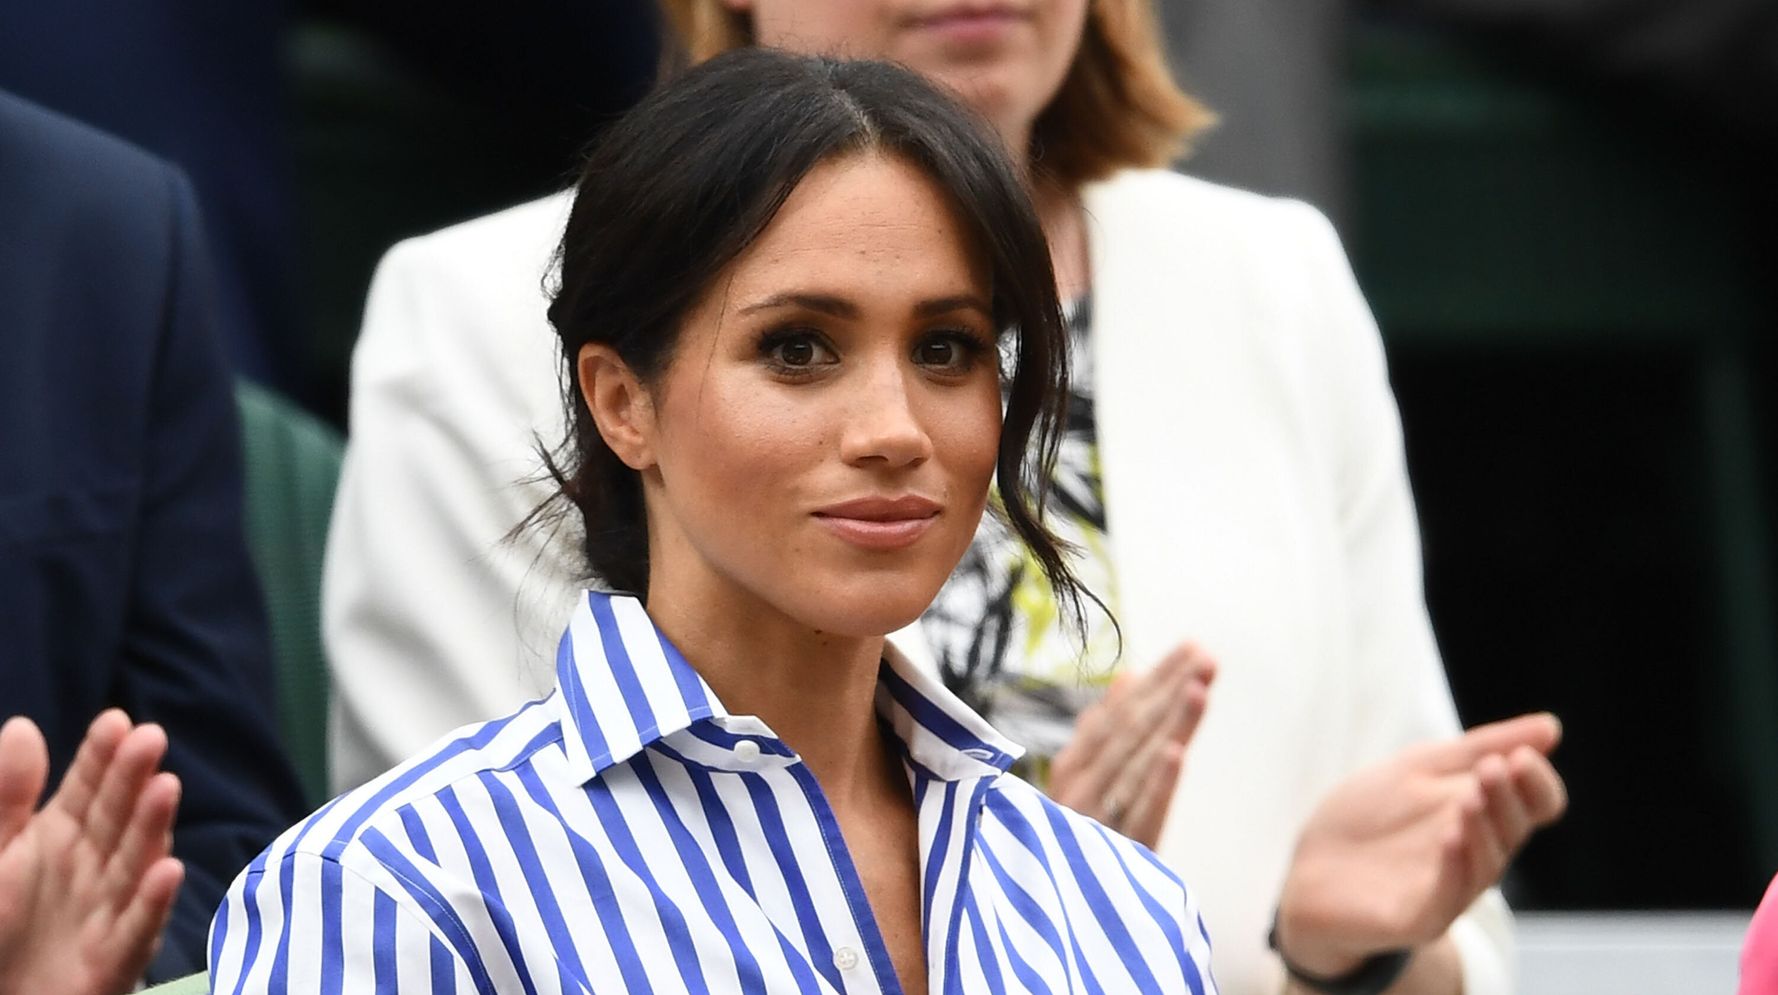 Meghan Markle responds that she bullied Royal Aides